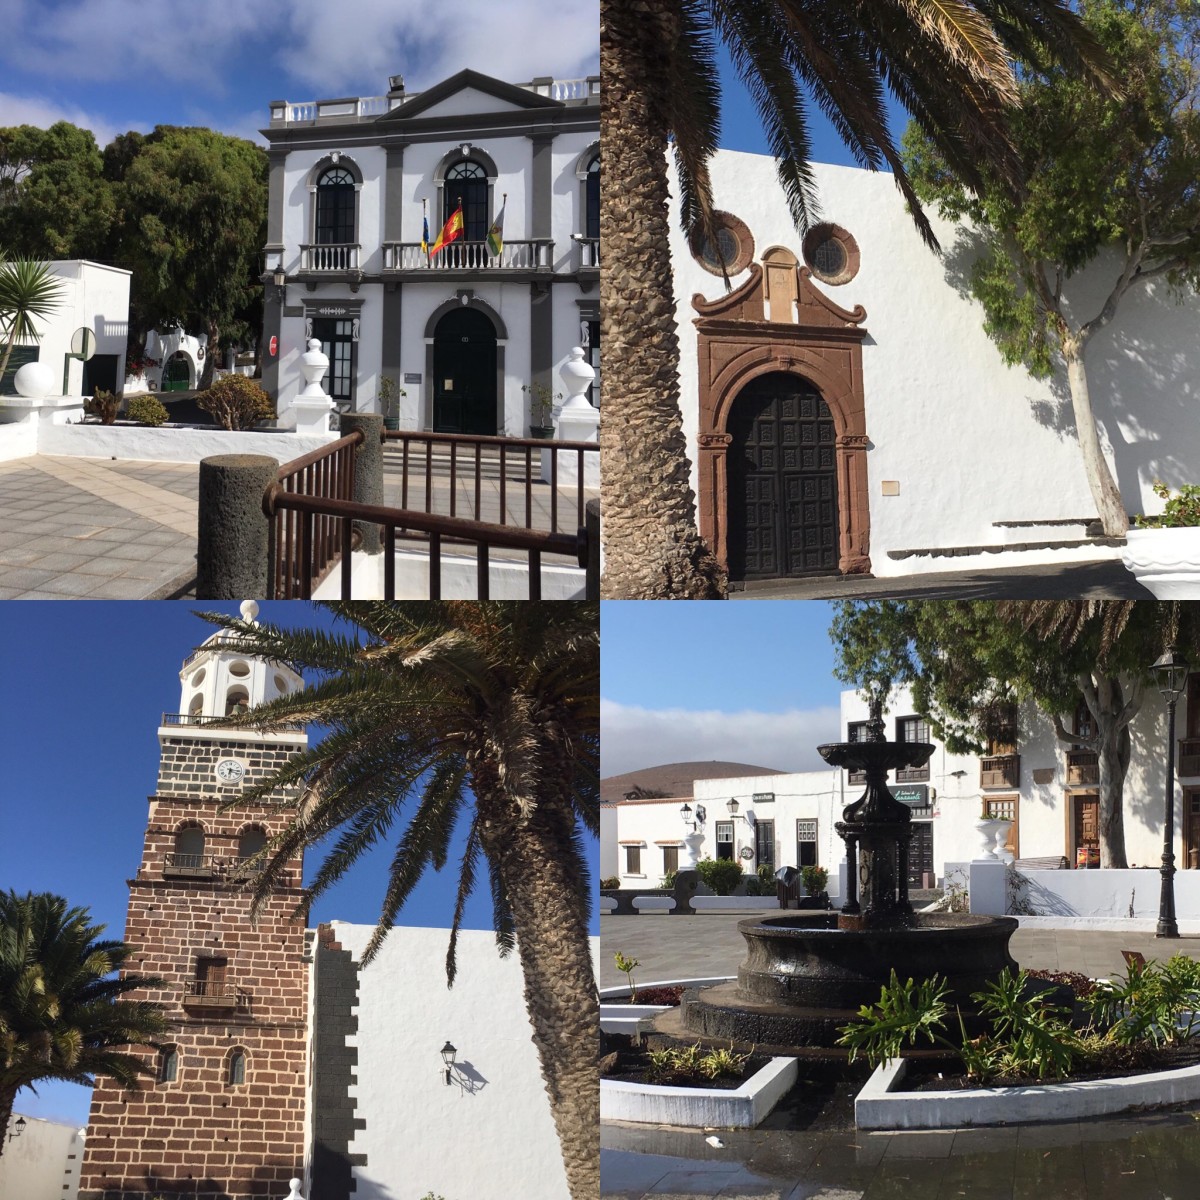 Fascinating beautiful historic buildings of Teguise.